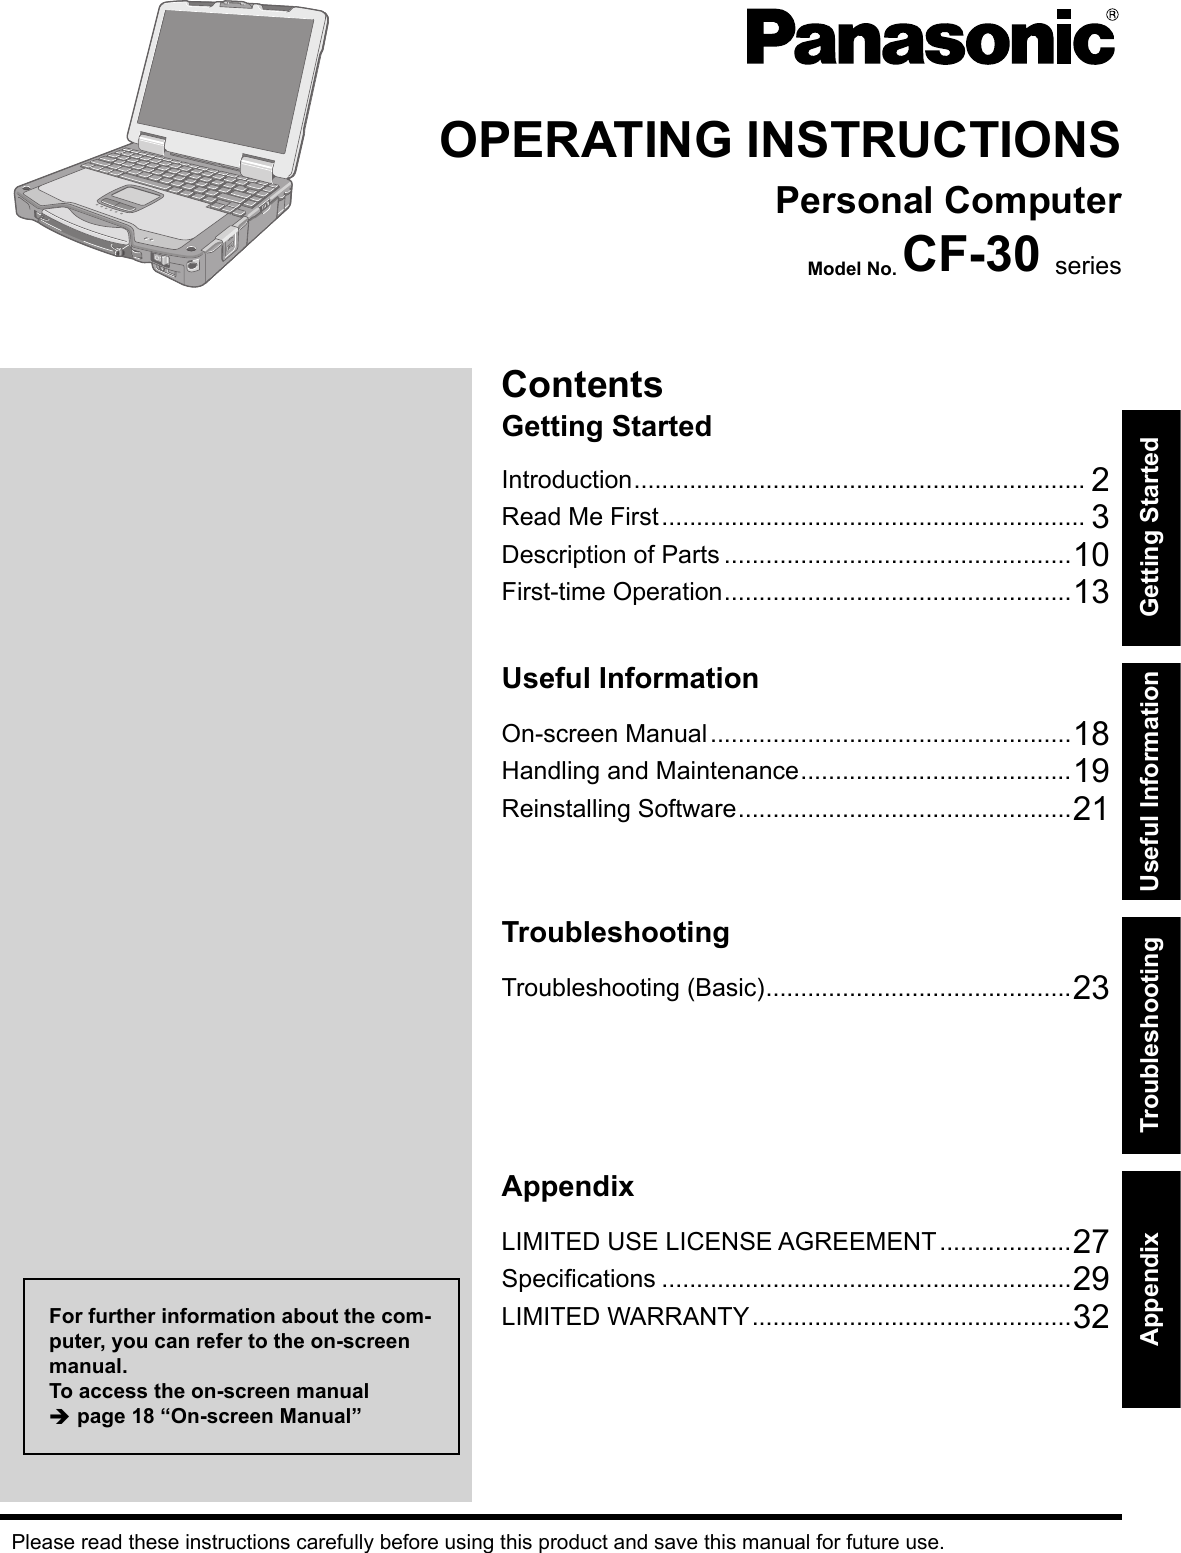 ContentsGetting StartedOPERATING INSTRUCTIONSPersonal ComputerModel No. CF-30 seriesIntroduction ................................................................. 2Read Me First ............................................................. 3Description of Parts ..................................................10First-time Operation ..................................................13Useful InformationOn-screen Manual ....................................................18Handling and Maintenance .......................................19Reinstalling Software ................................................21TroubleshootingTroubleshooting (Basic) ............................................23AppendixLIMITED USE LICENSE AGREEMENT ...................27Speciﬁ cations ...........................................................29LIMITED WARRANTY ..............................................32Please read these instructions carefully before using this product and save this manual for future use.For further information about the com-puter, you can refer to the on-screen manual.To access the on-screen manual  page 18 “On-screen Manual”Getting StartedUseful InformationTroubleshootingAppendixDFQW5231ZA_CF-30mk3_V_XP_M.indb   1 2008/11/10   17:52:08